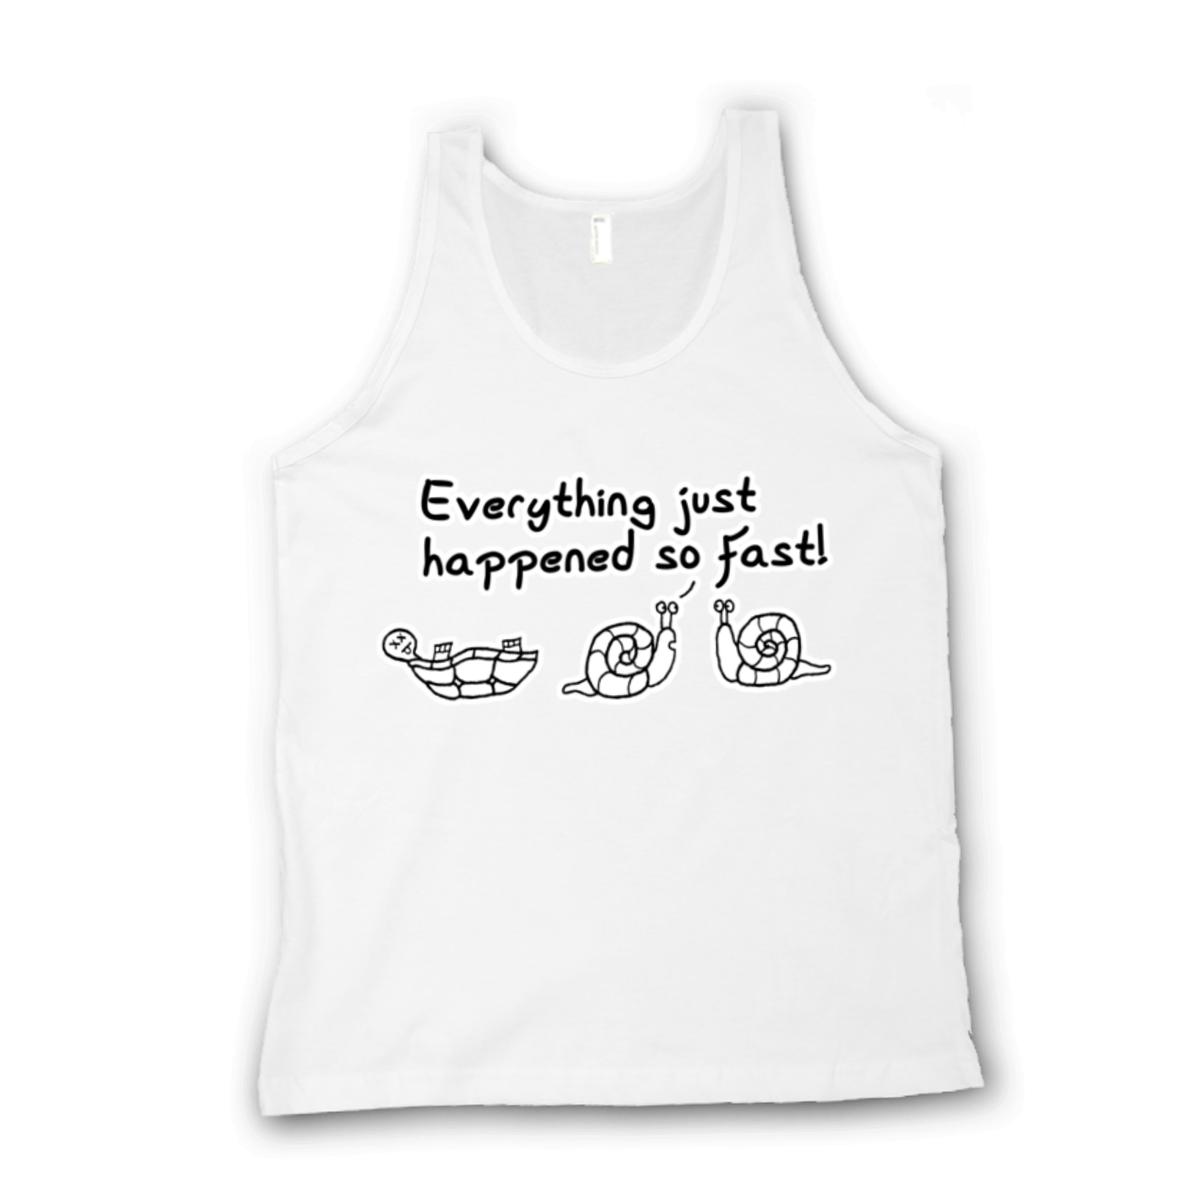 Happened So Fast Unisex Tank Top Large white